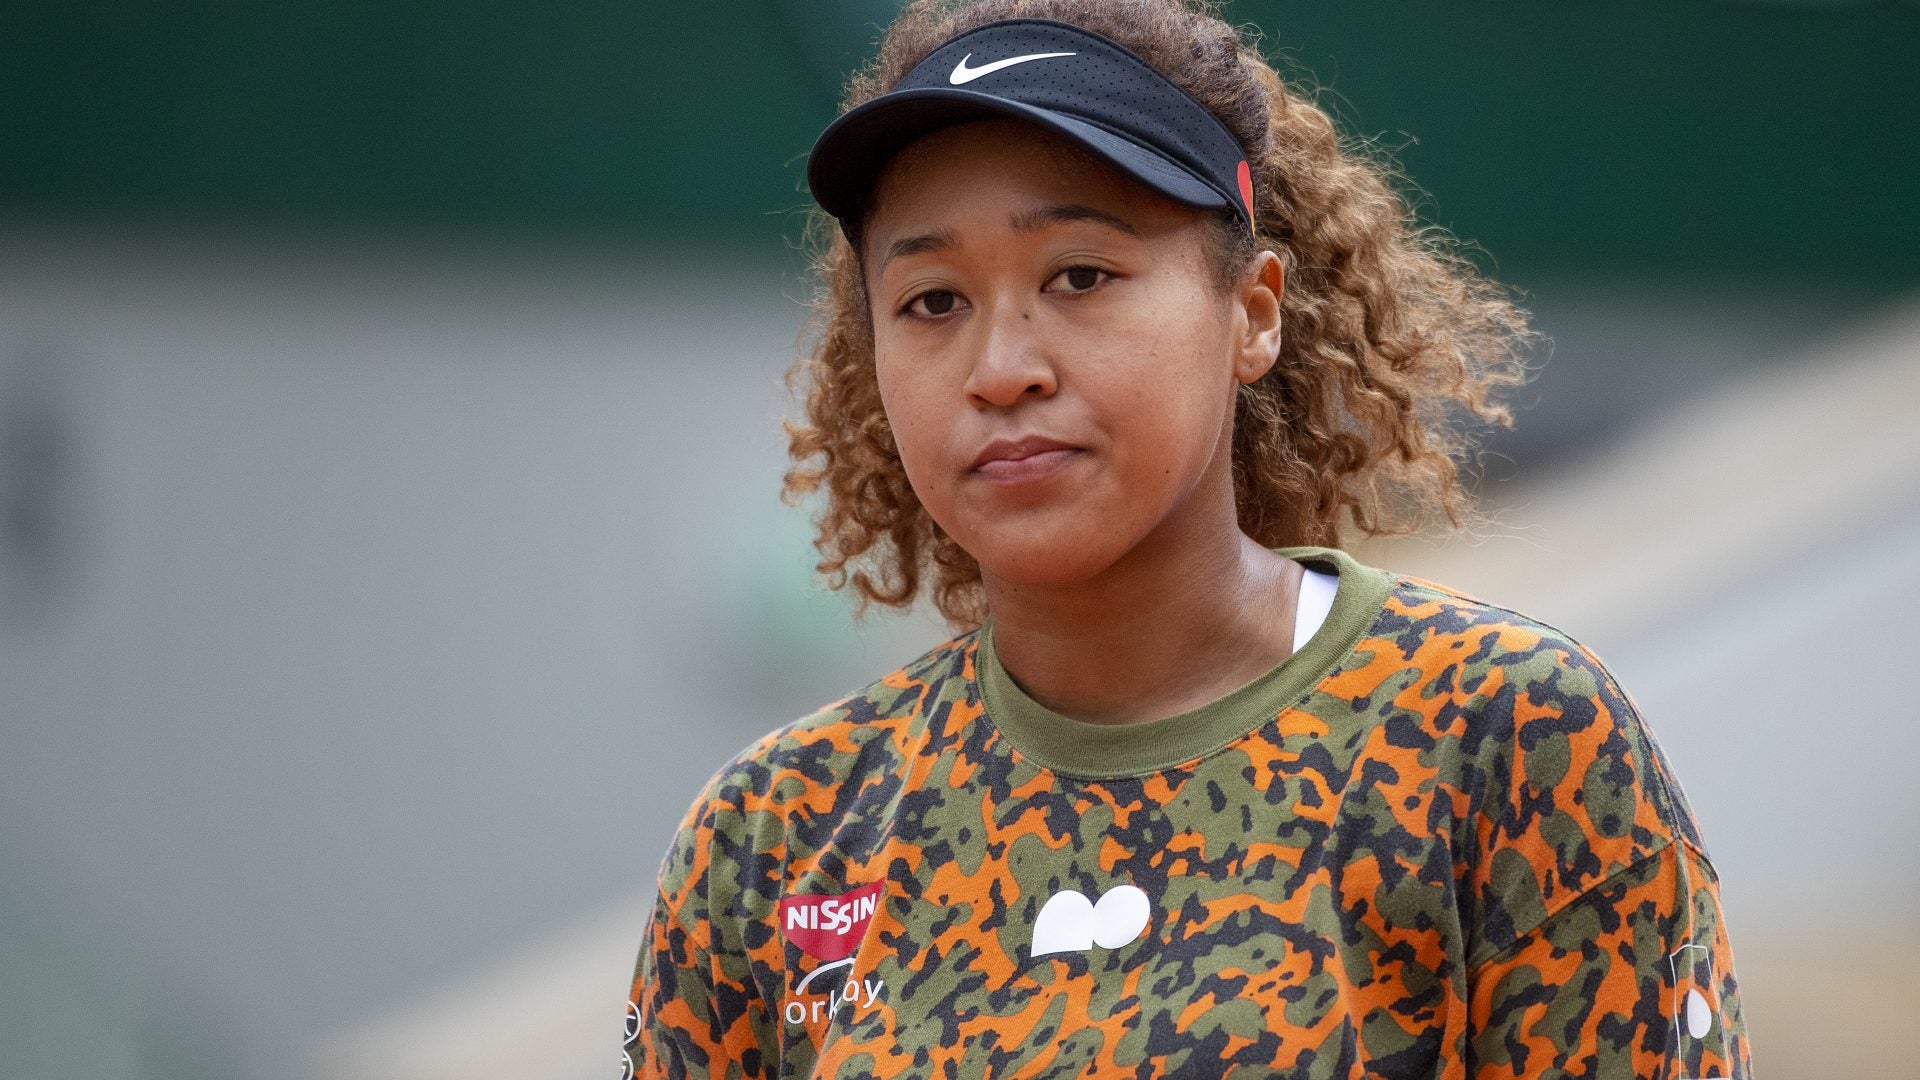 Naomi Osaka Announces She Will Not Do Any Press At French Open To Protect Her Mental Health